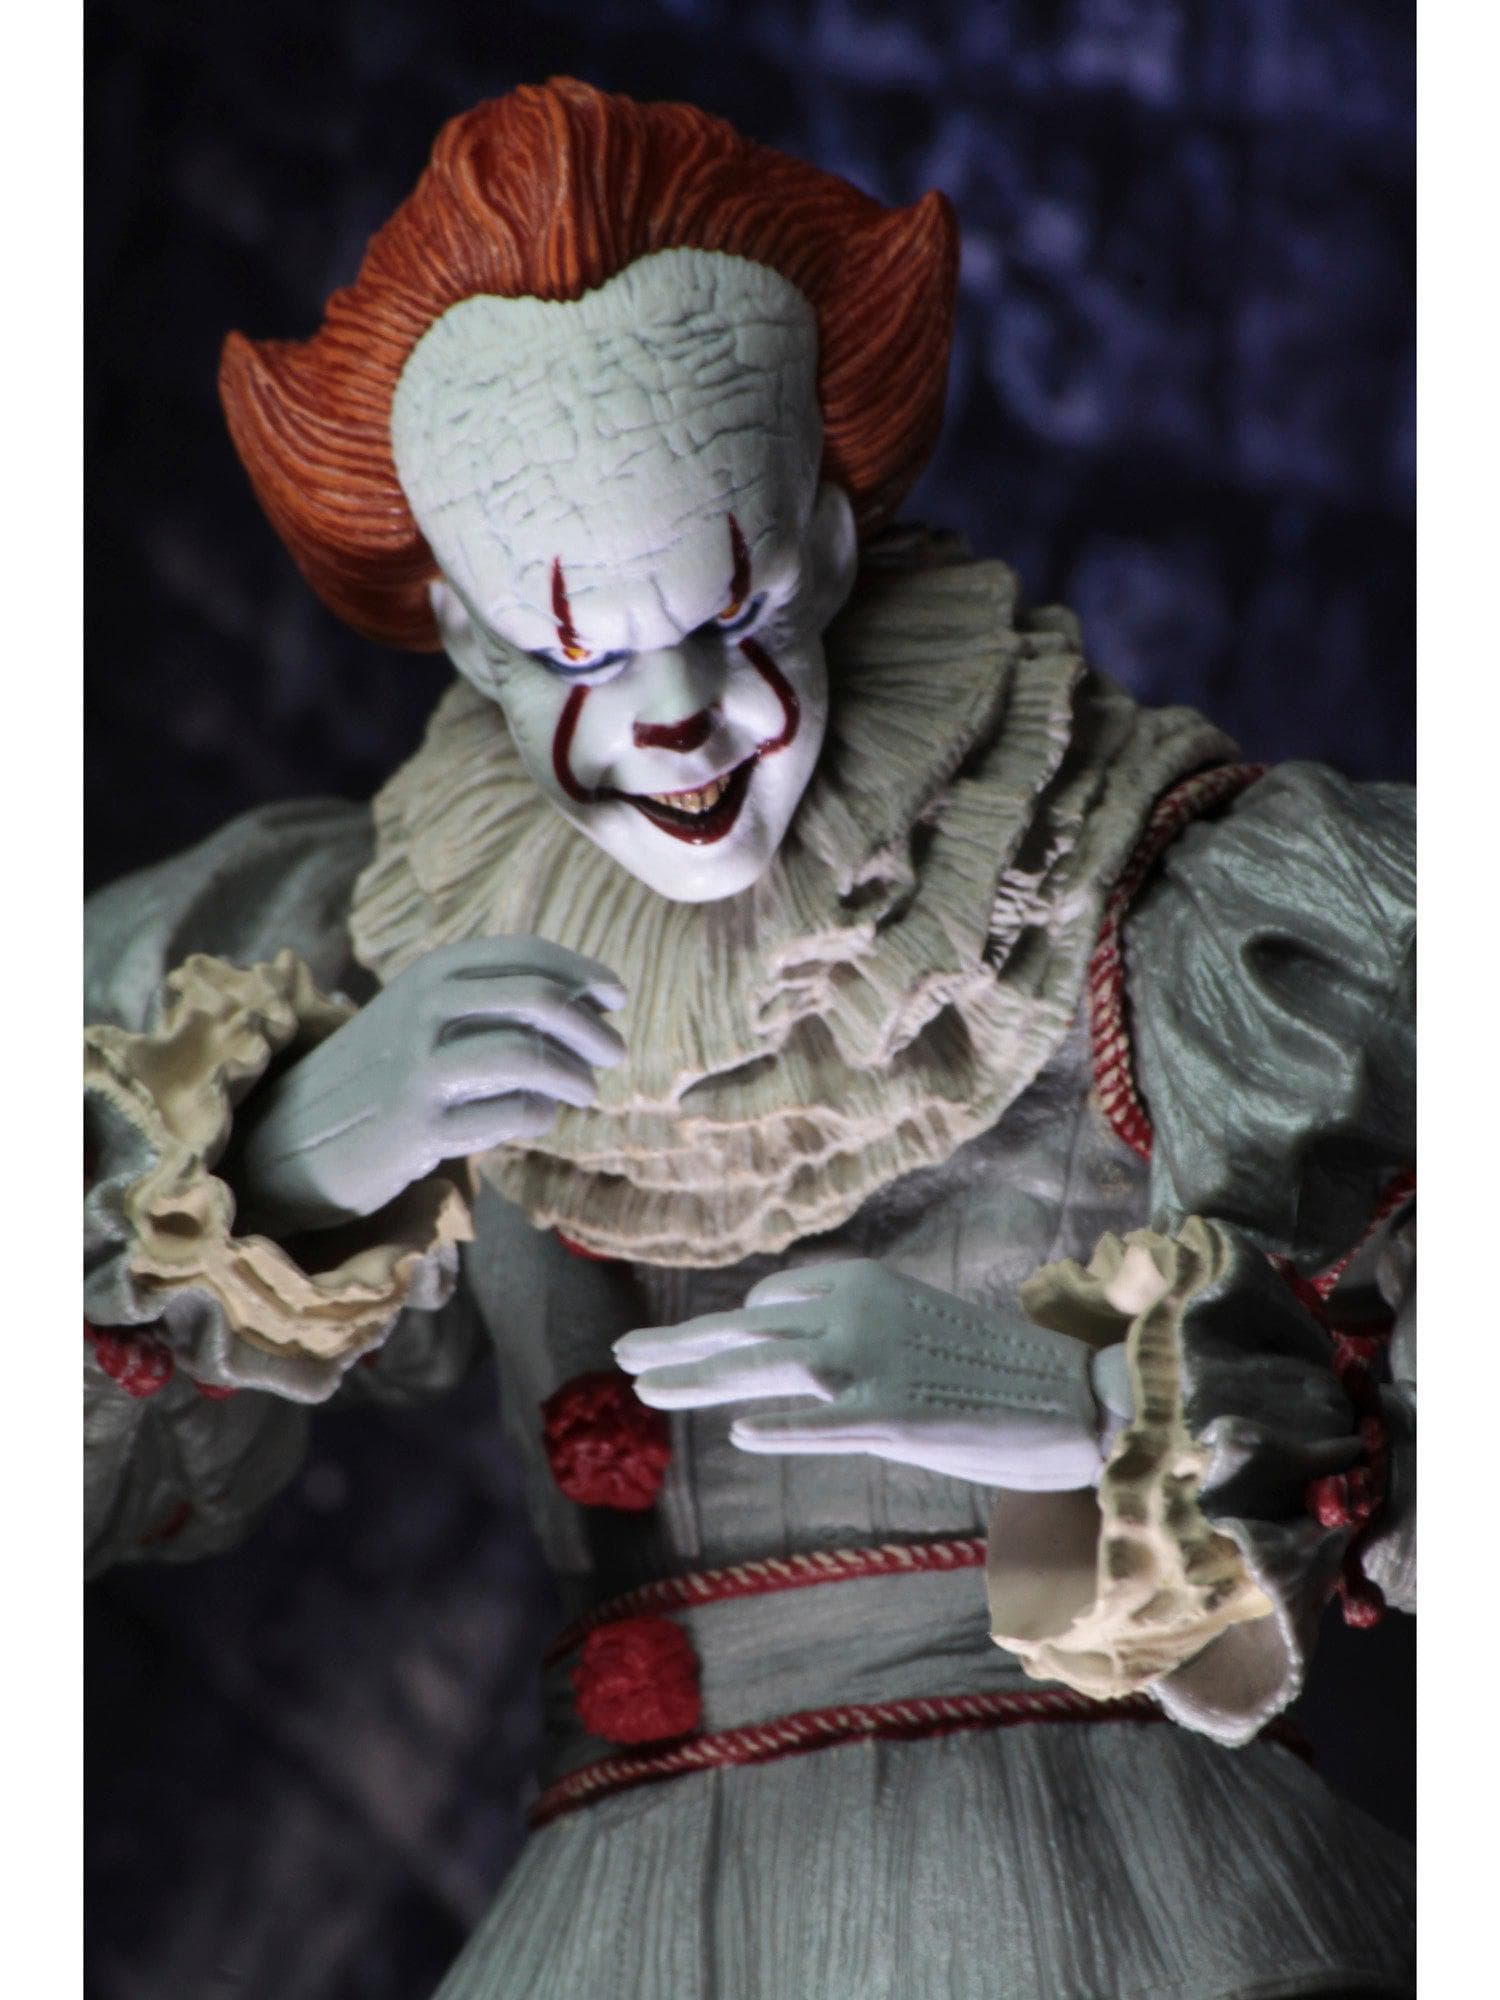 NECA - IT - 7" Action Figure - Ultimate Pennywise 2017 - costumes.com